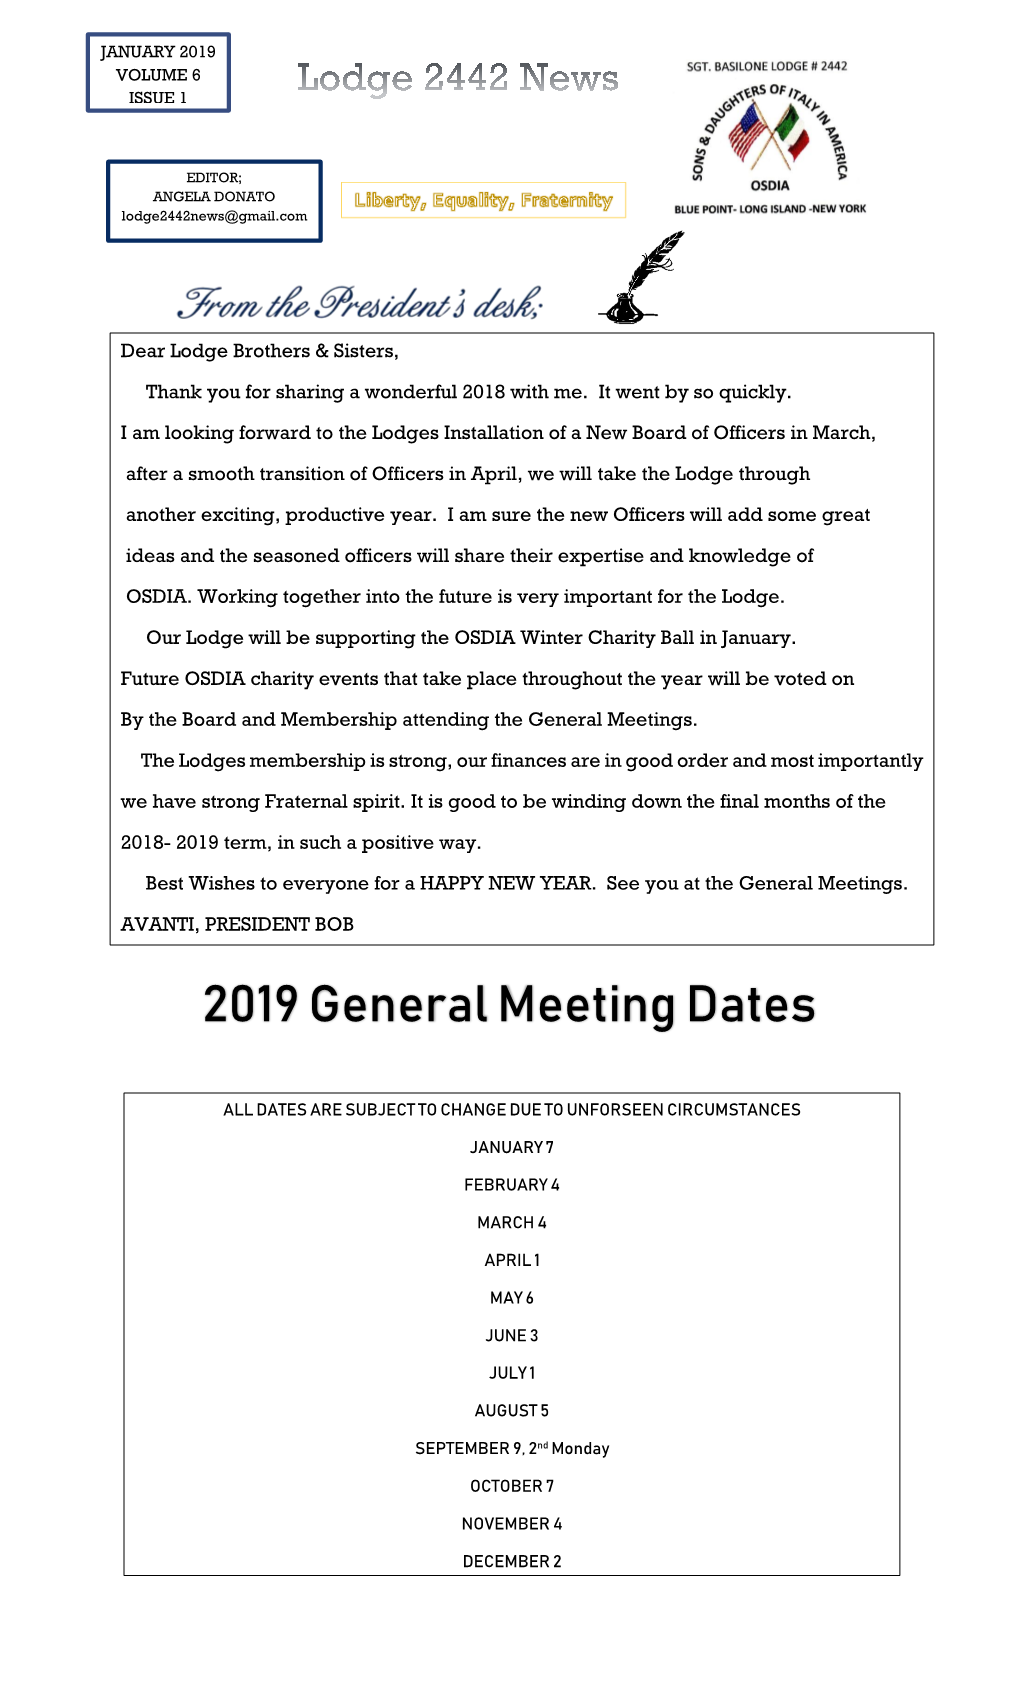 Your Text Here 2019 General Meeting Dates